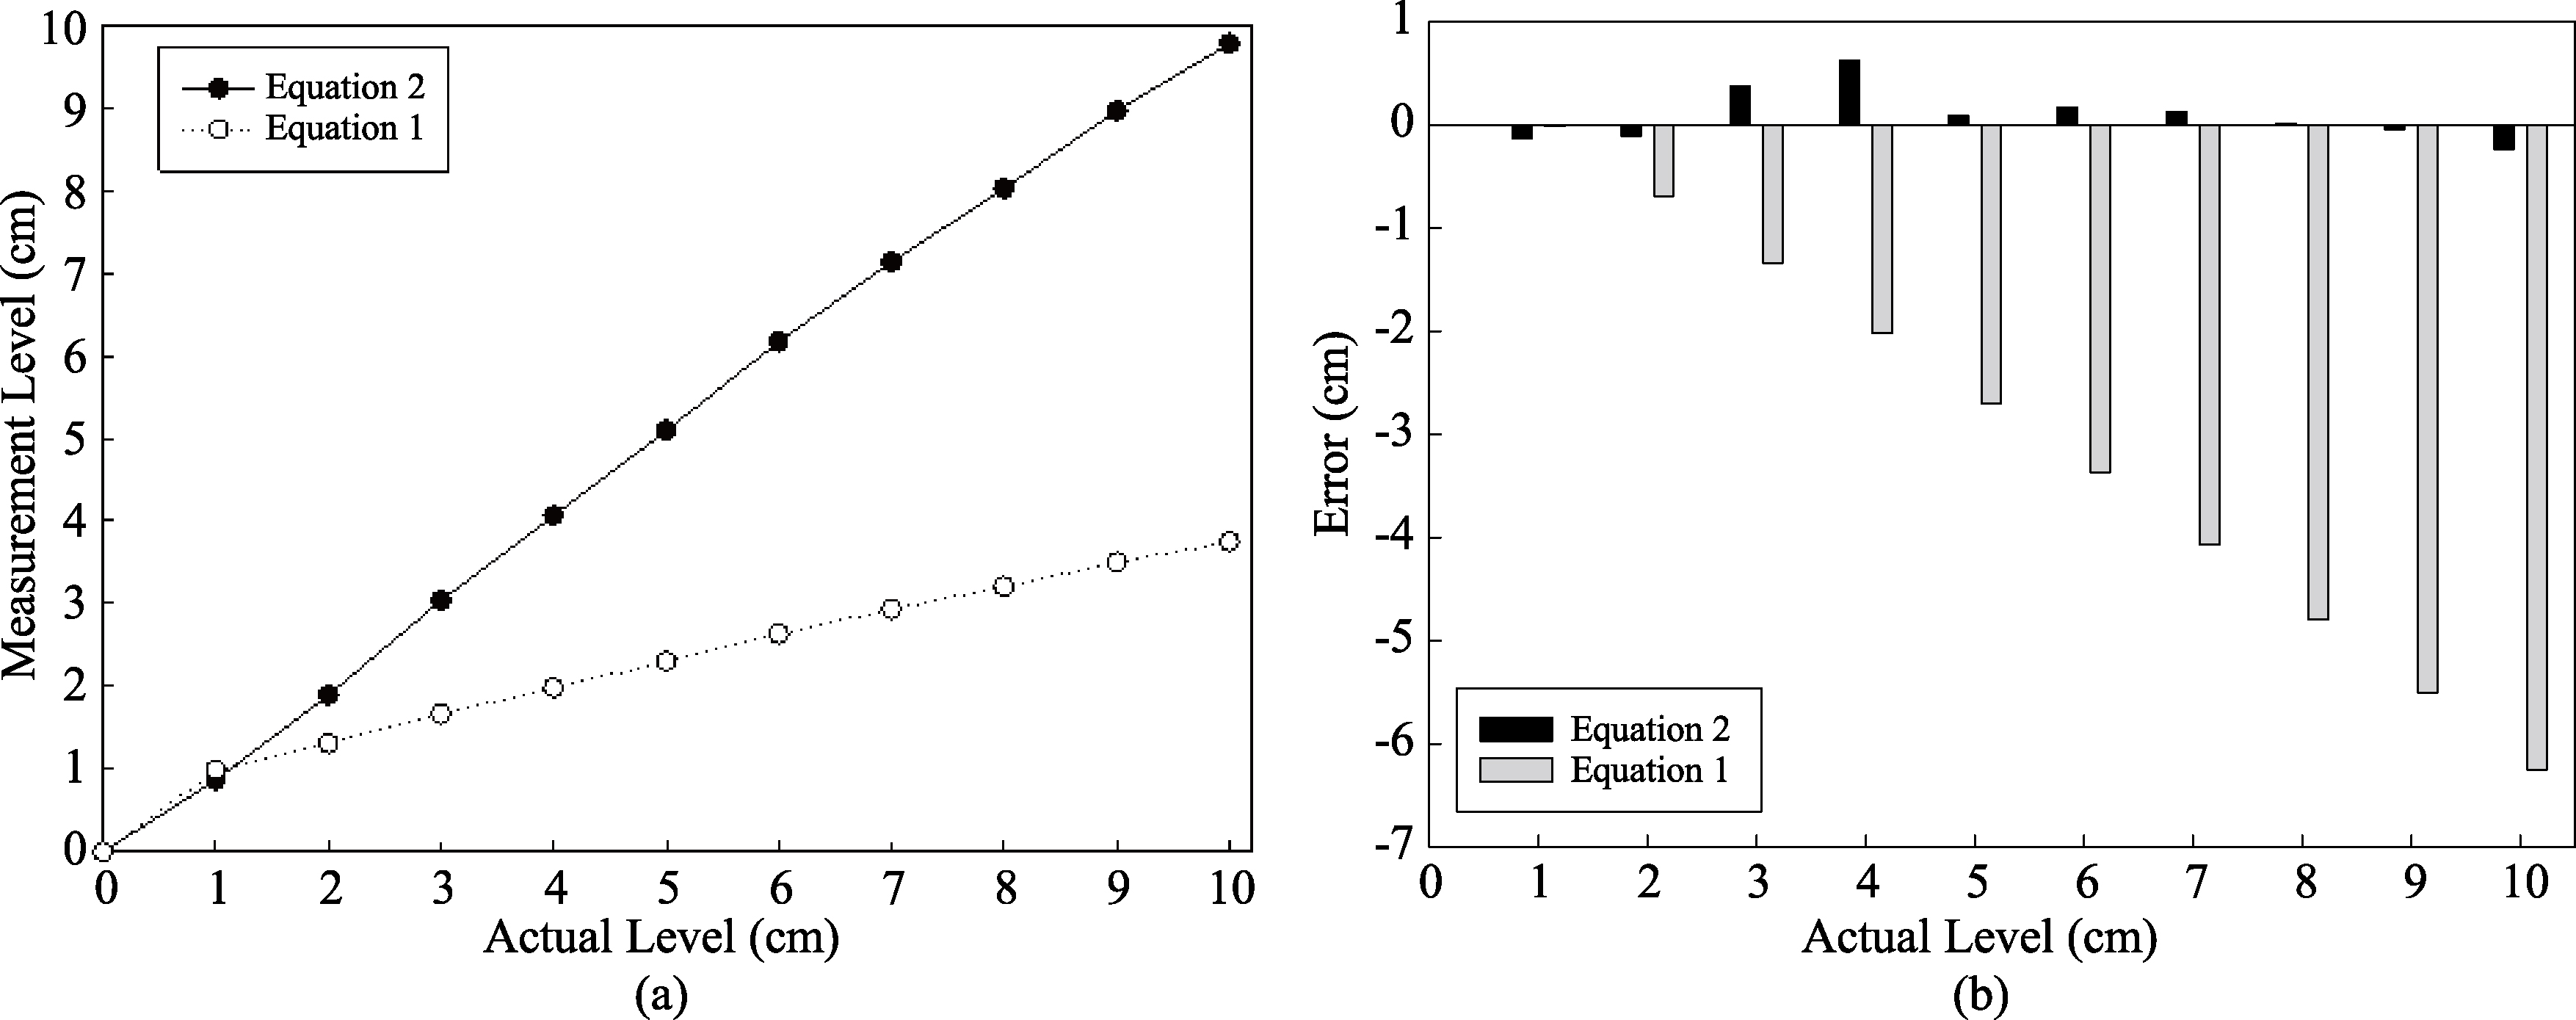 Comparison of the developed compensation algorithm and actual level through the measured capacitance value. (a) Water level calculated by Eq. (1) versus using Eq. (2); (b) error value comparison of Eqs (1) and (2).